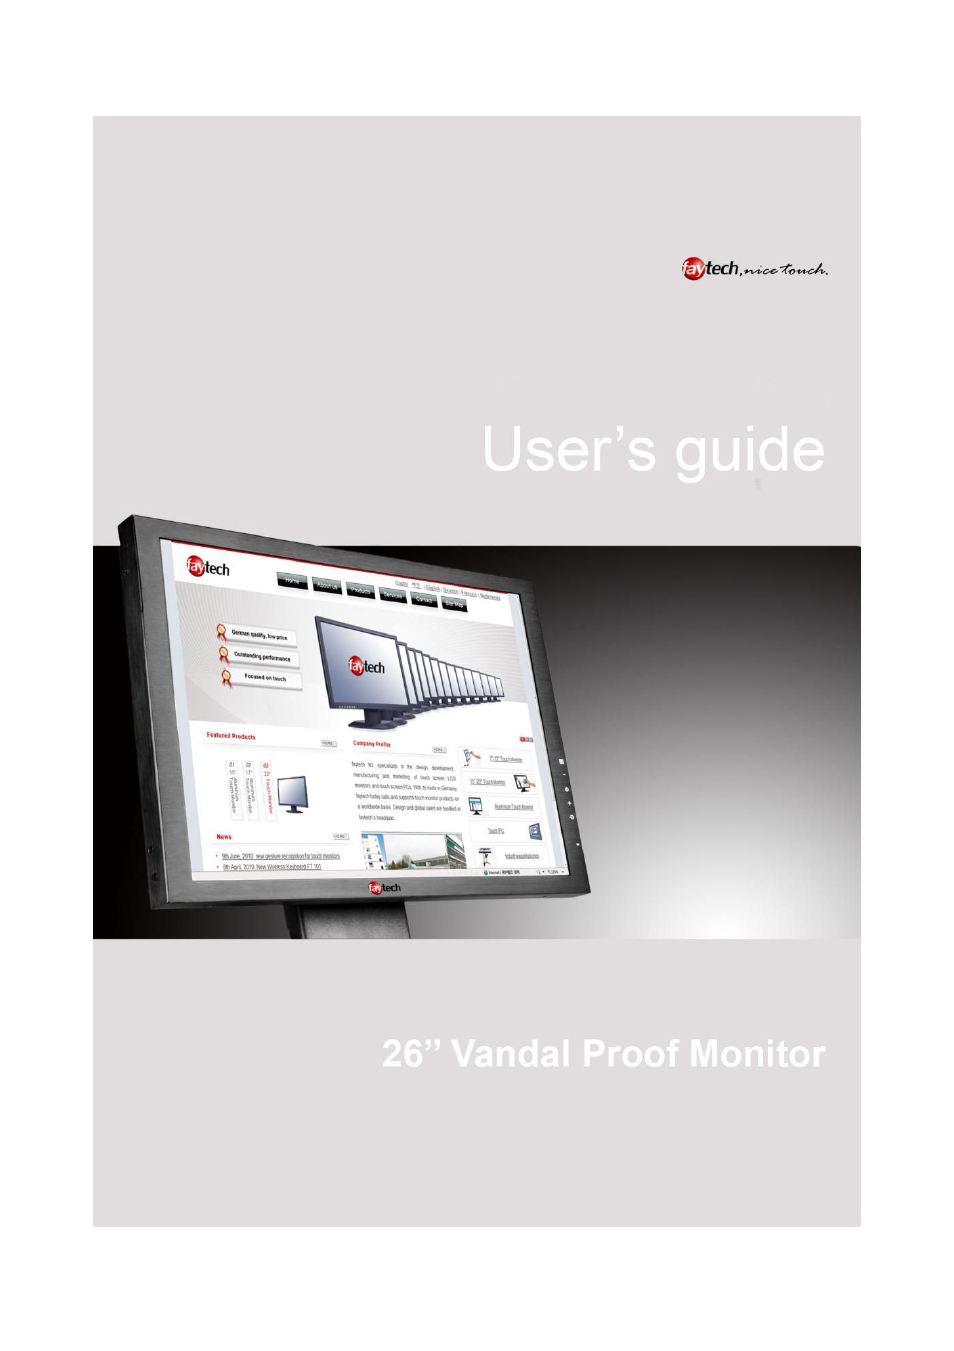 faytech 26" Vandal Non-Touch Monitor User Manual | 22 pages